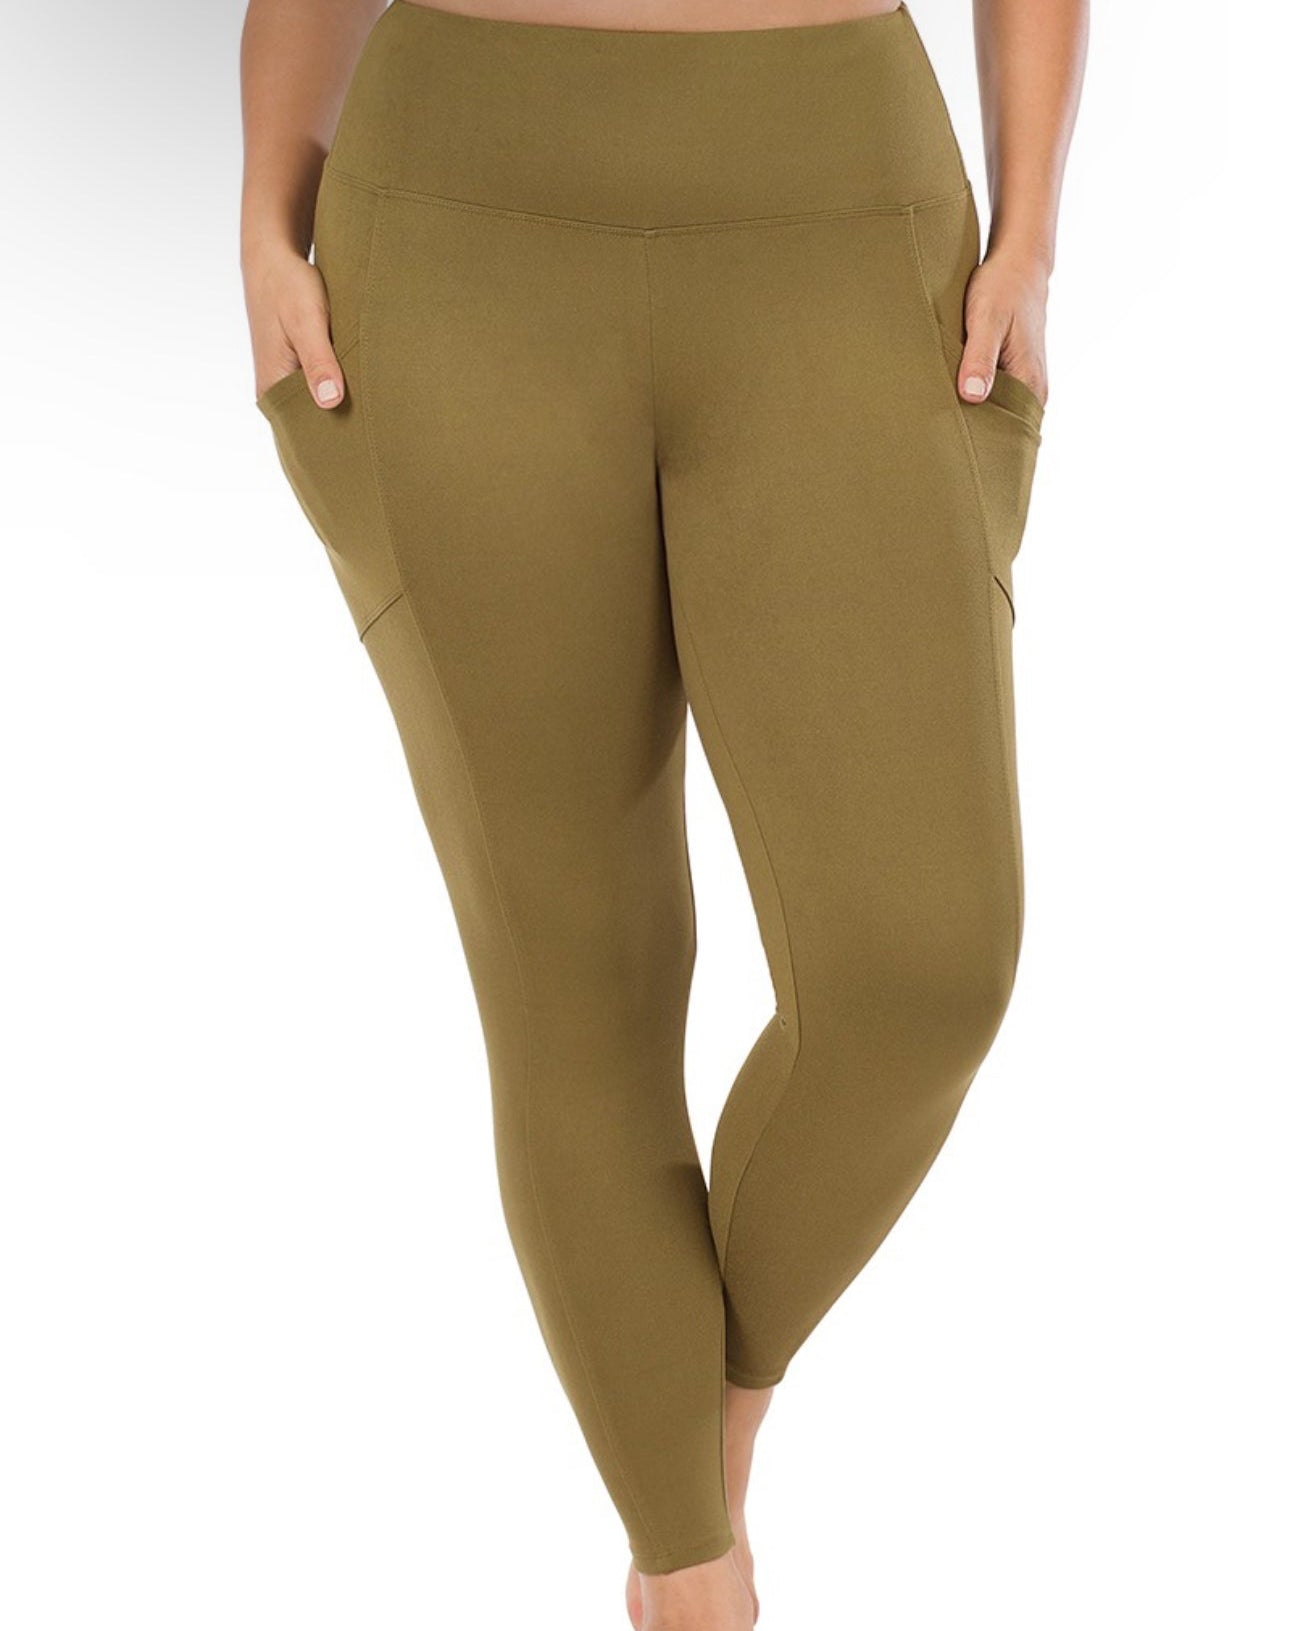 Dusty olive butter soft leggings w/pockets – When Pigs Fly Boutique